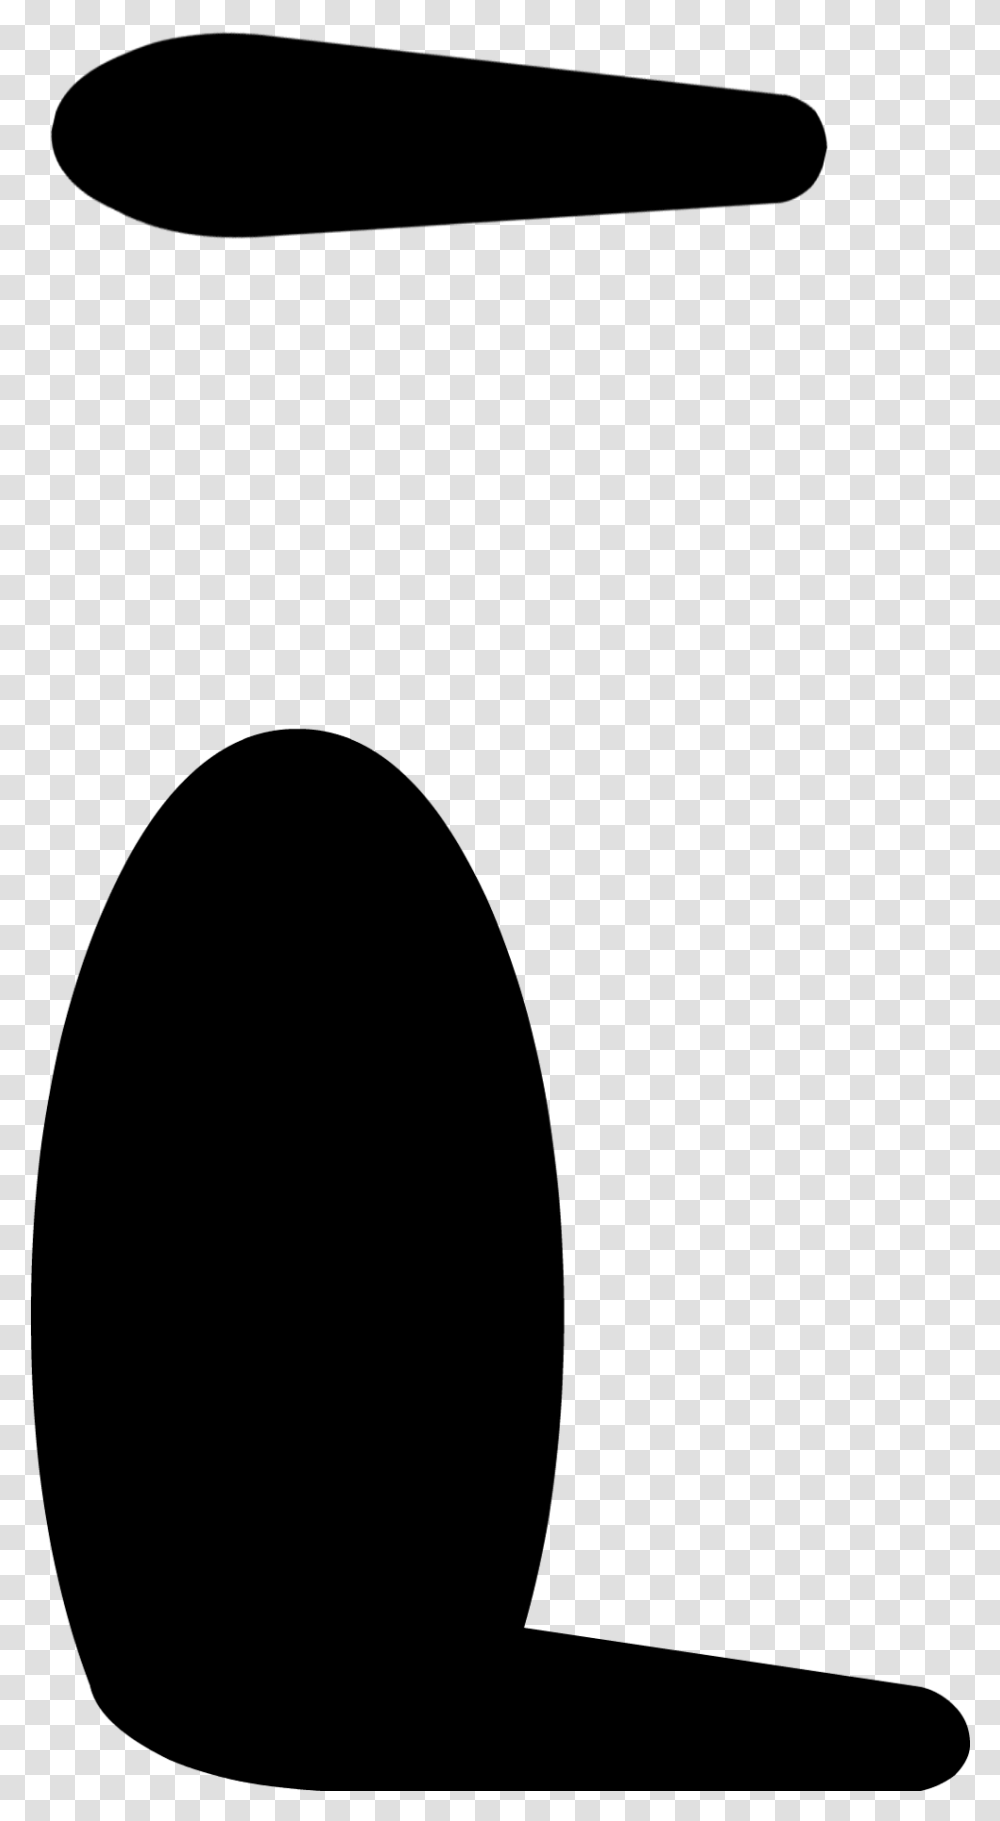 Free Download Bfdi Bored Eye Images Background Bfdi Eye Cheek Left, Gray, World Of Warcraft Transparent Png